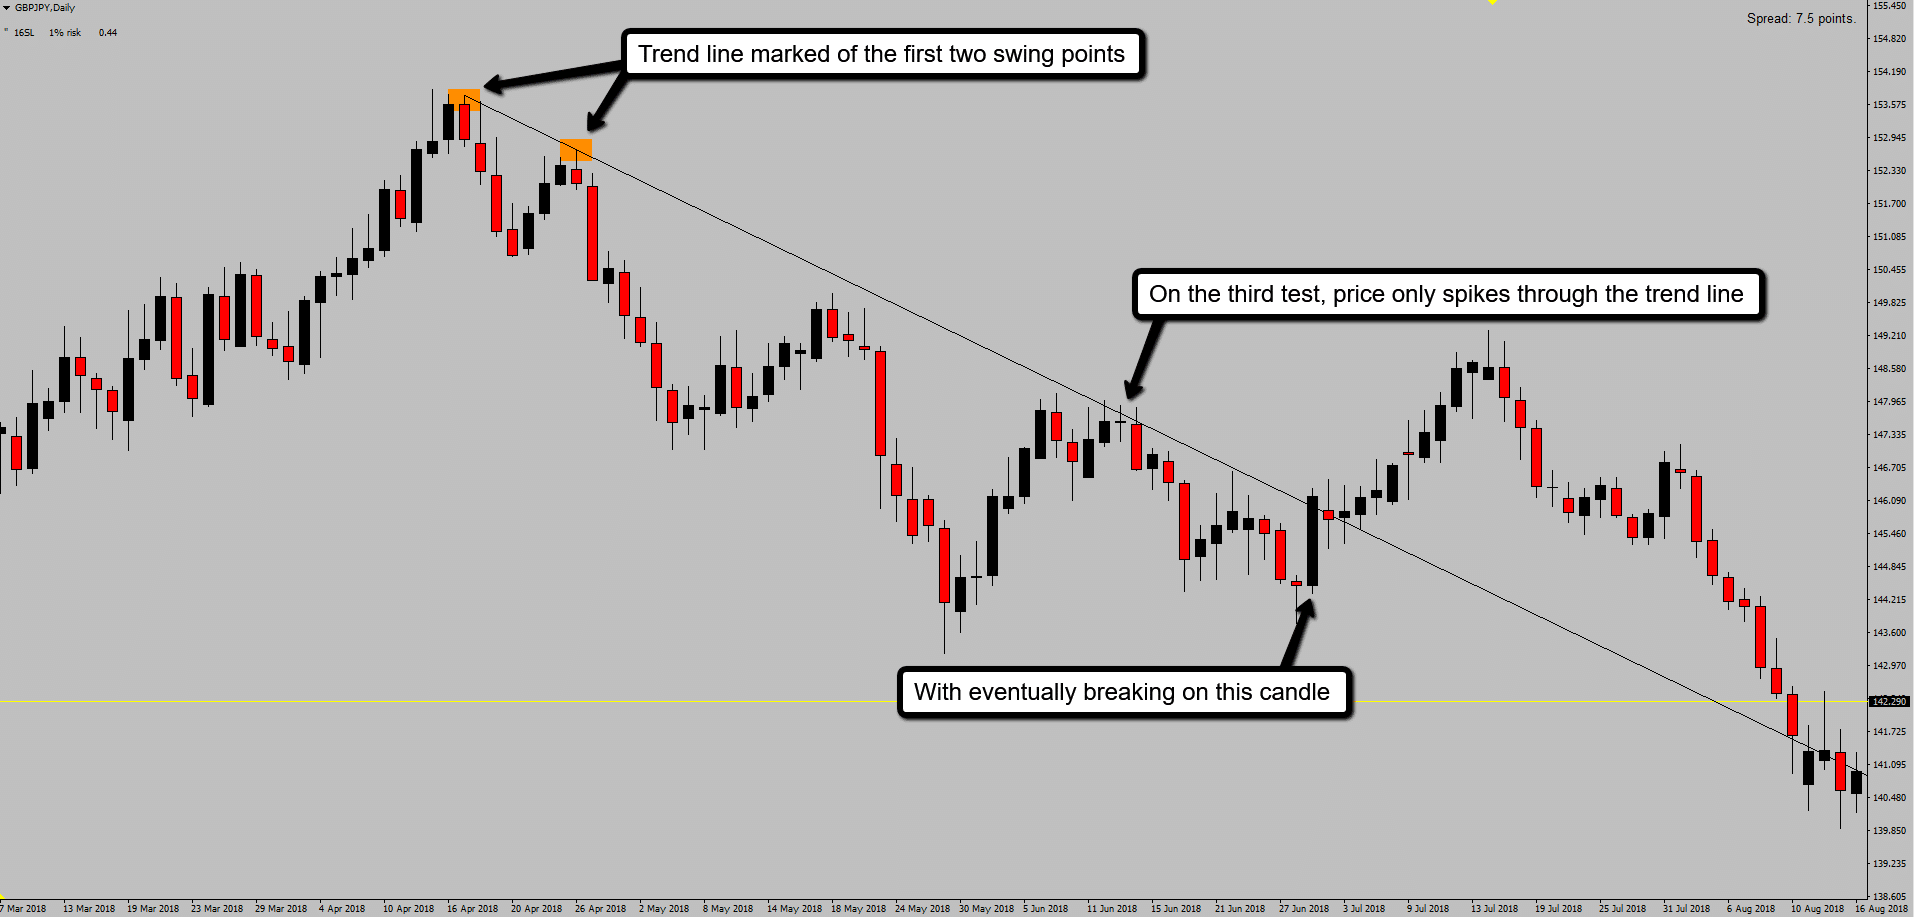 Candle wicks spike through the trend line